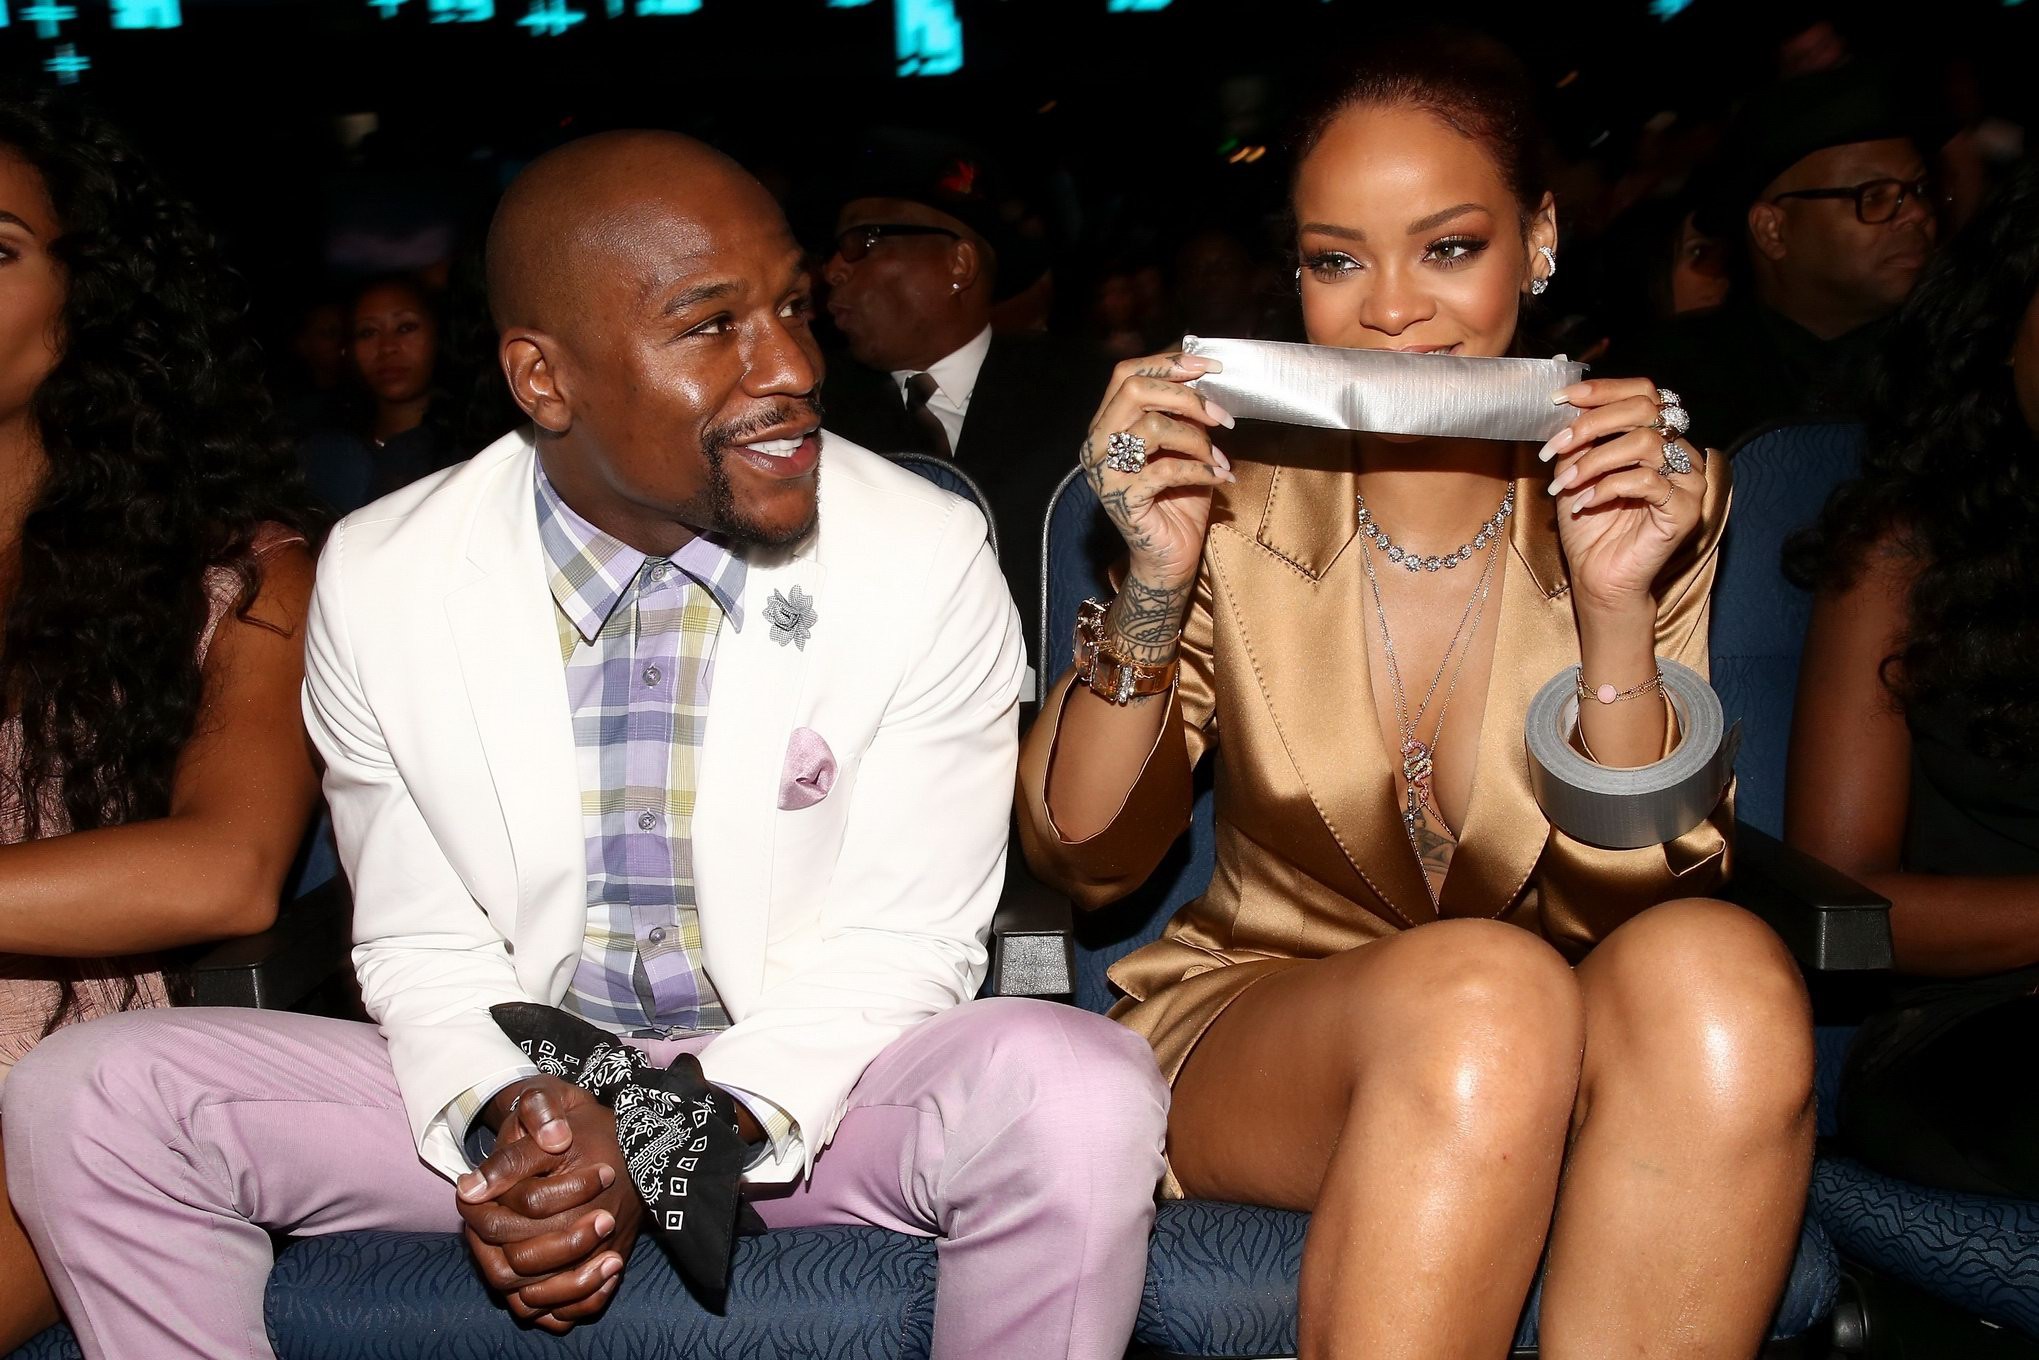 Rihanna braless wearing a wide open jacket at the BET Awards #75160010